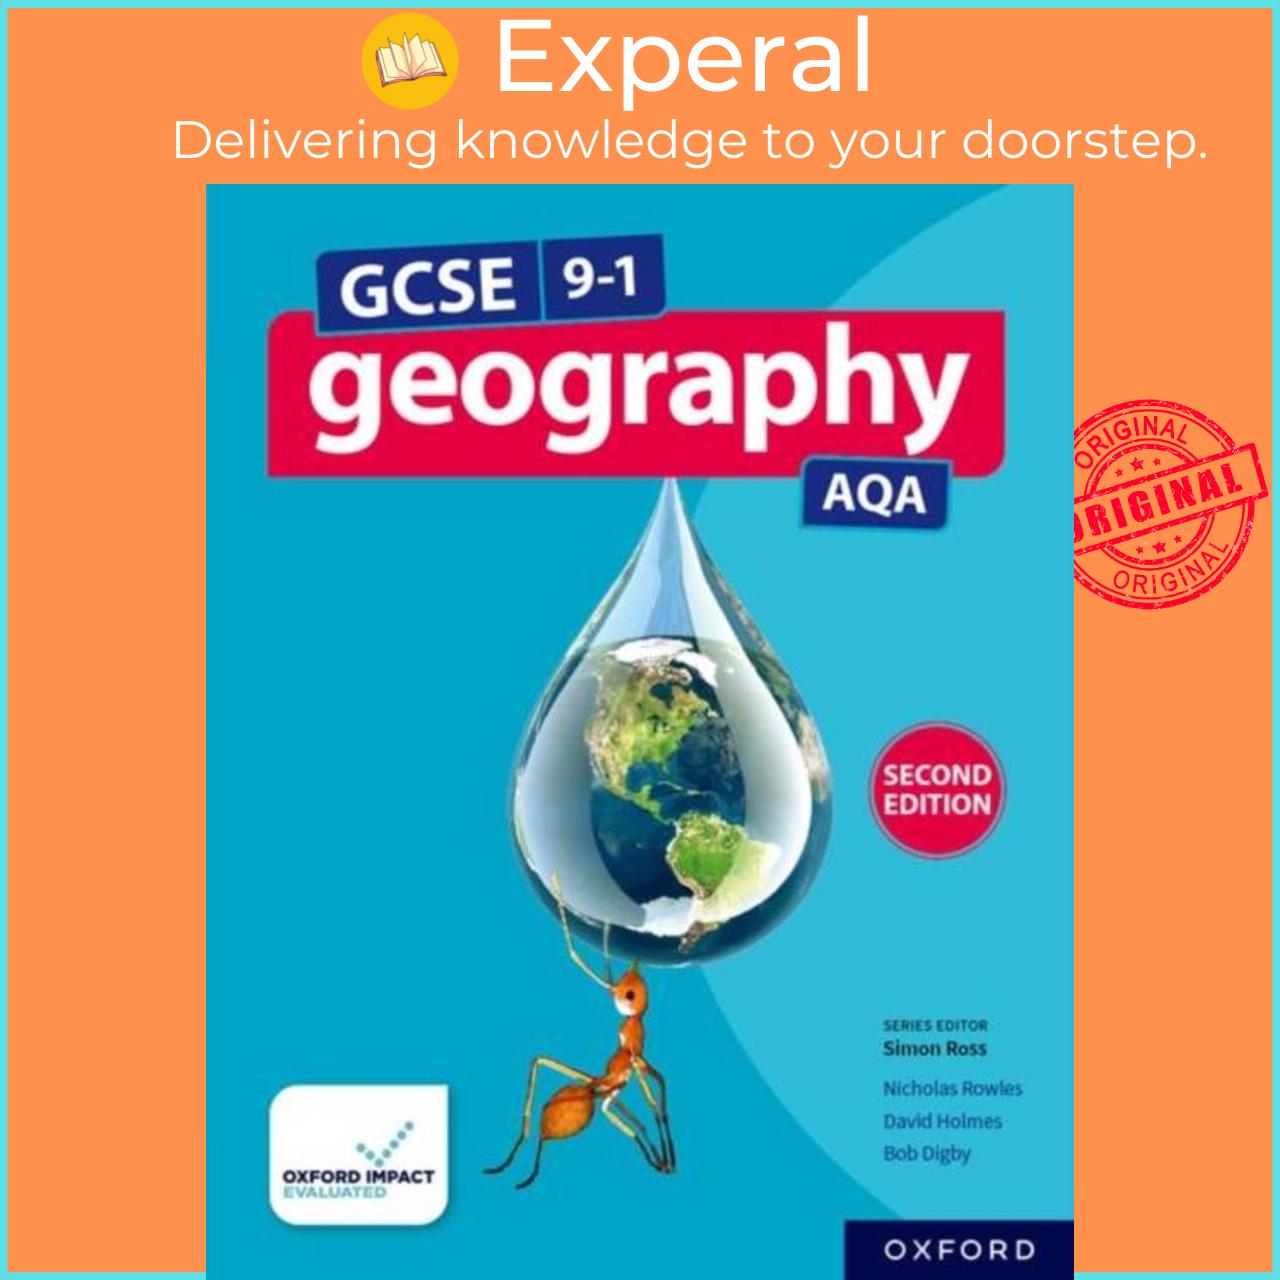 Sách - GCSE 9-1 Geography AQA: Student Book Second Edition by David Holmes (UK edition, paperback)